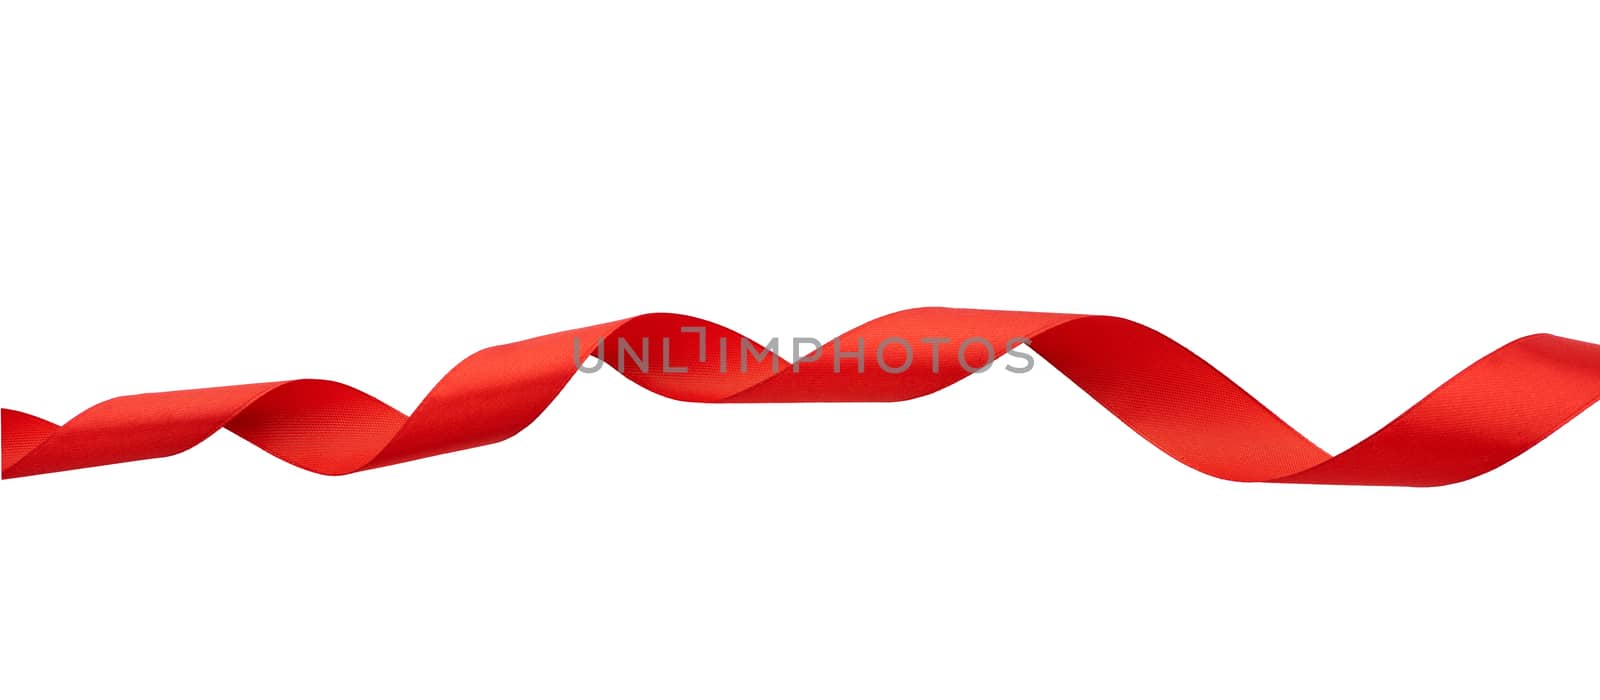 twisted silk red ribbon isolated on white background, decorative element for designer. Festive decoration element. Holiday background.